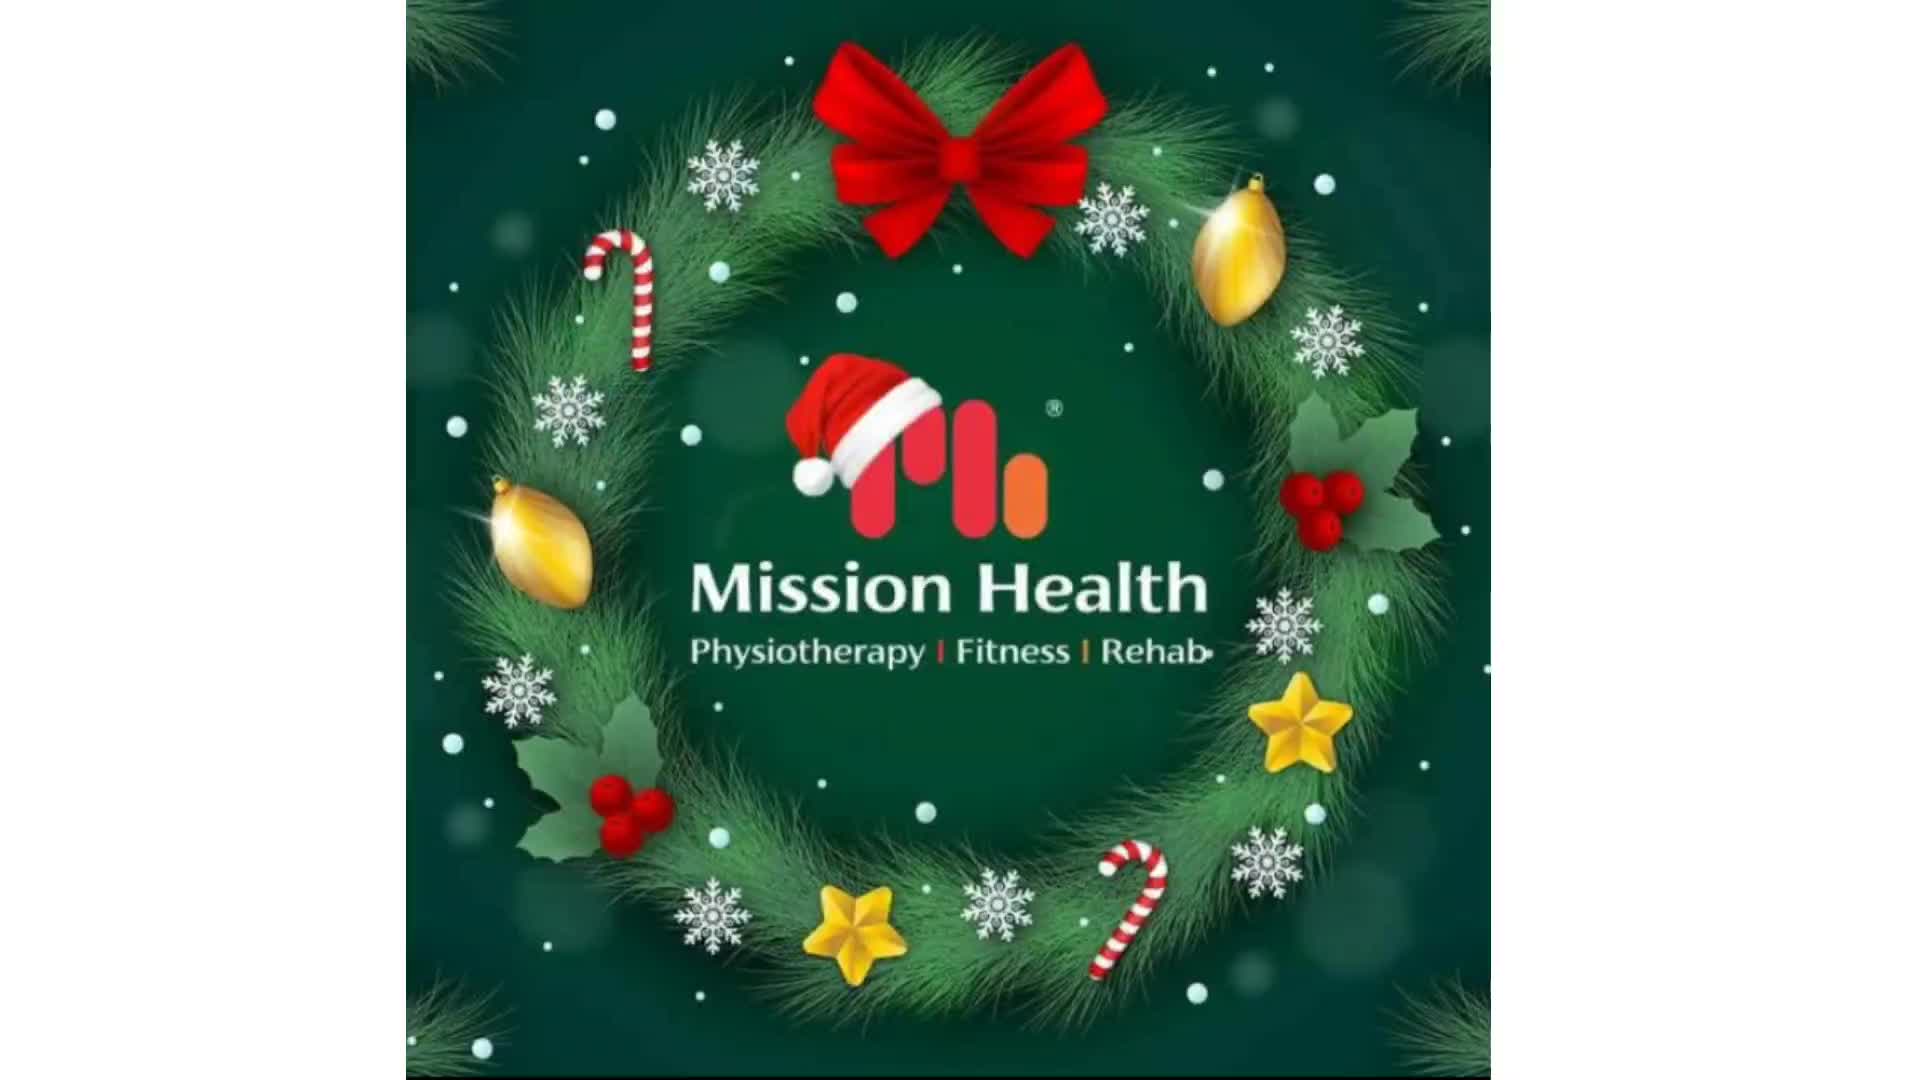 Twice the blessings, twice the love, twice the fun and twice the awesomeness... 

Celebrating twinning with Mission Health...

#christmas2k21 
#christmasdays 
#twins 
#twinsdaysfestival 
#missionhealthfamily 
#missionhealthcareer 
#mhworld 
#viralpost 
#viralvideos 
#employeeenagement 
#happyemployees